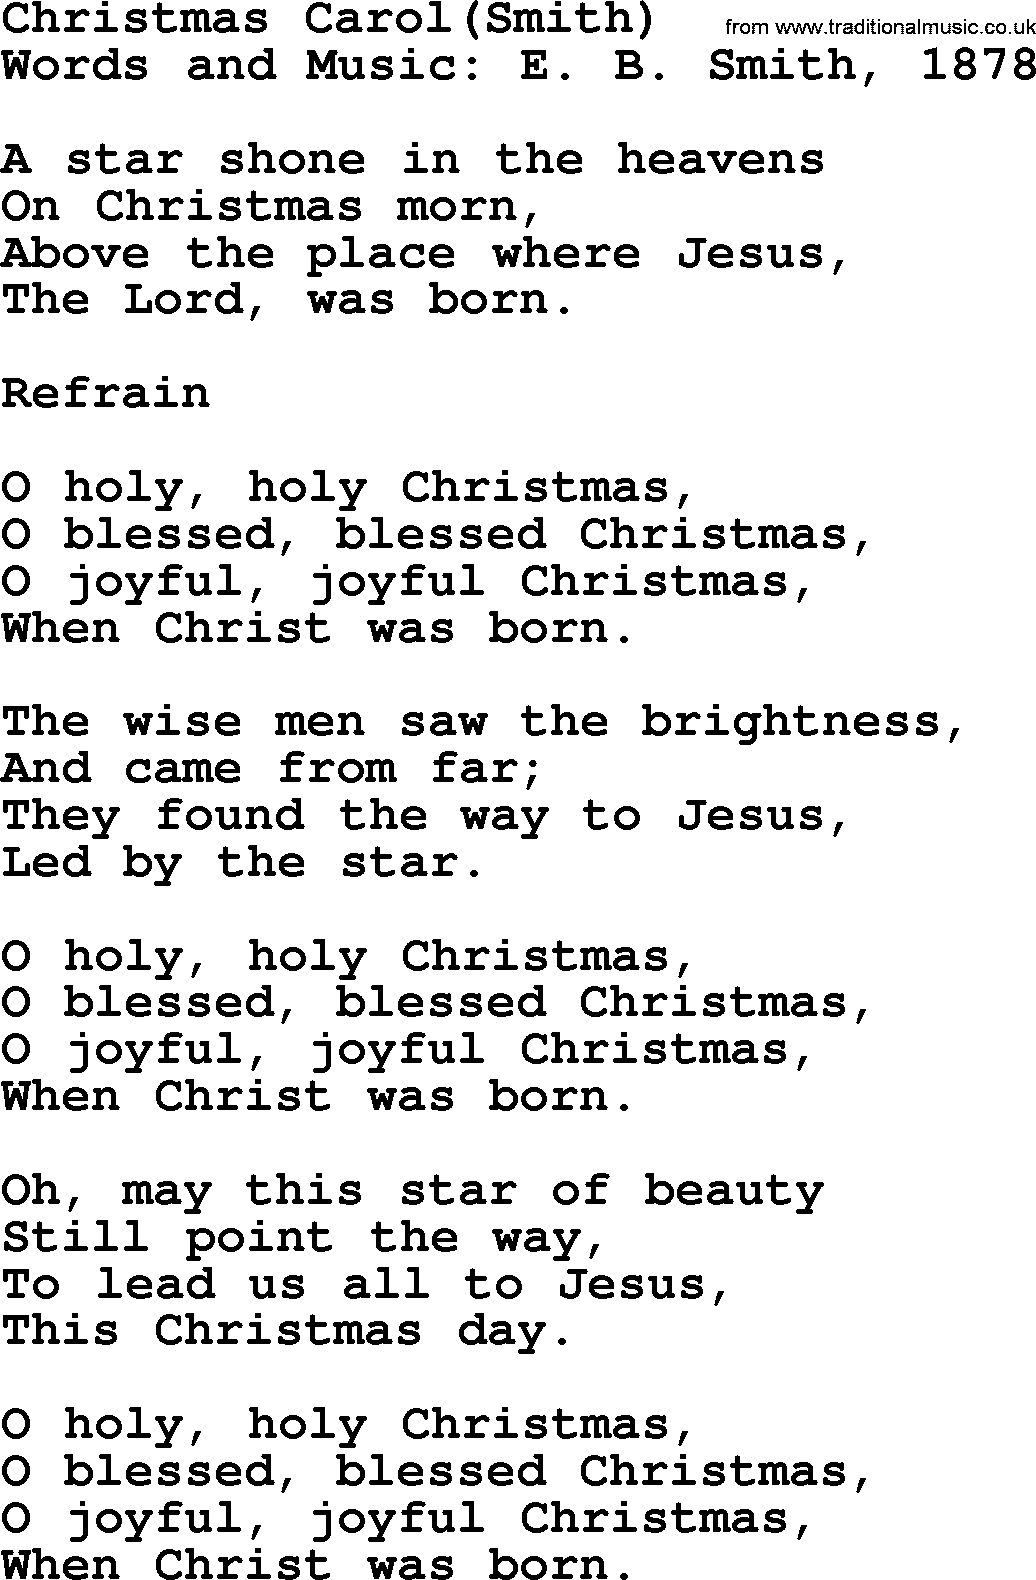 280 Christmas Hymns and songs with PowerPoints and PDF, title: Christmas Carol(smith), lyrics, PPT and PDF